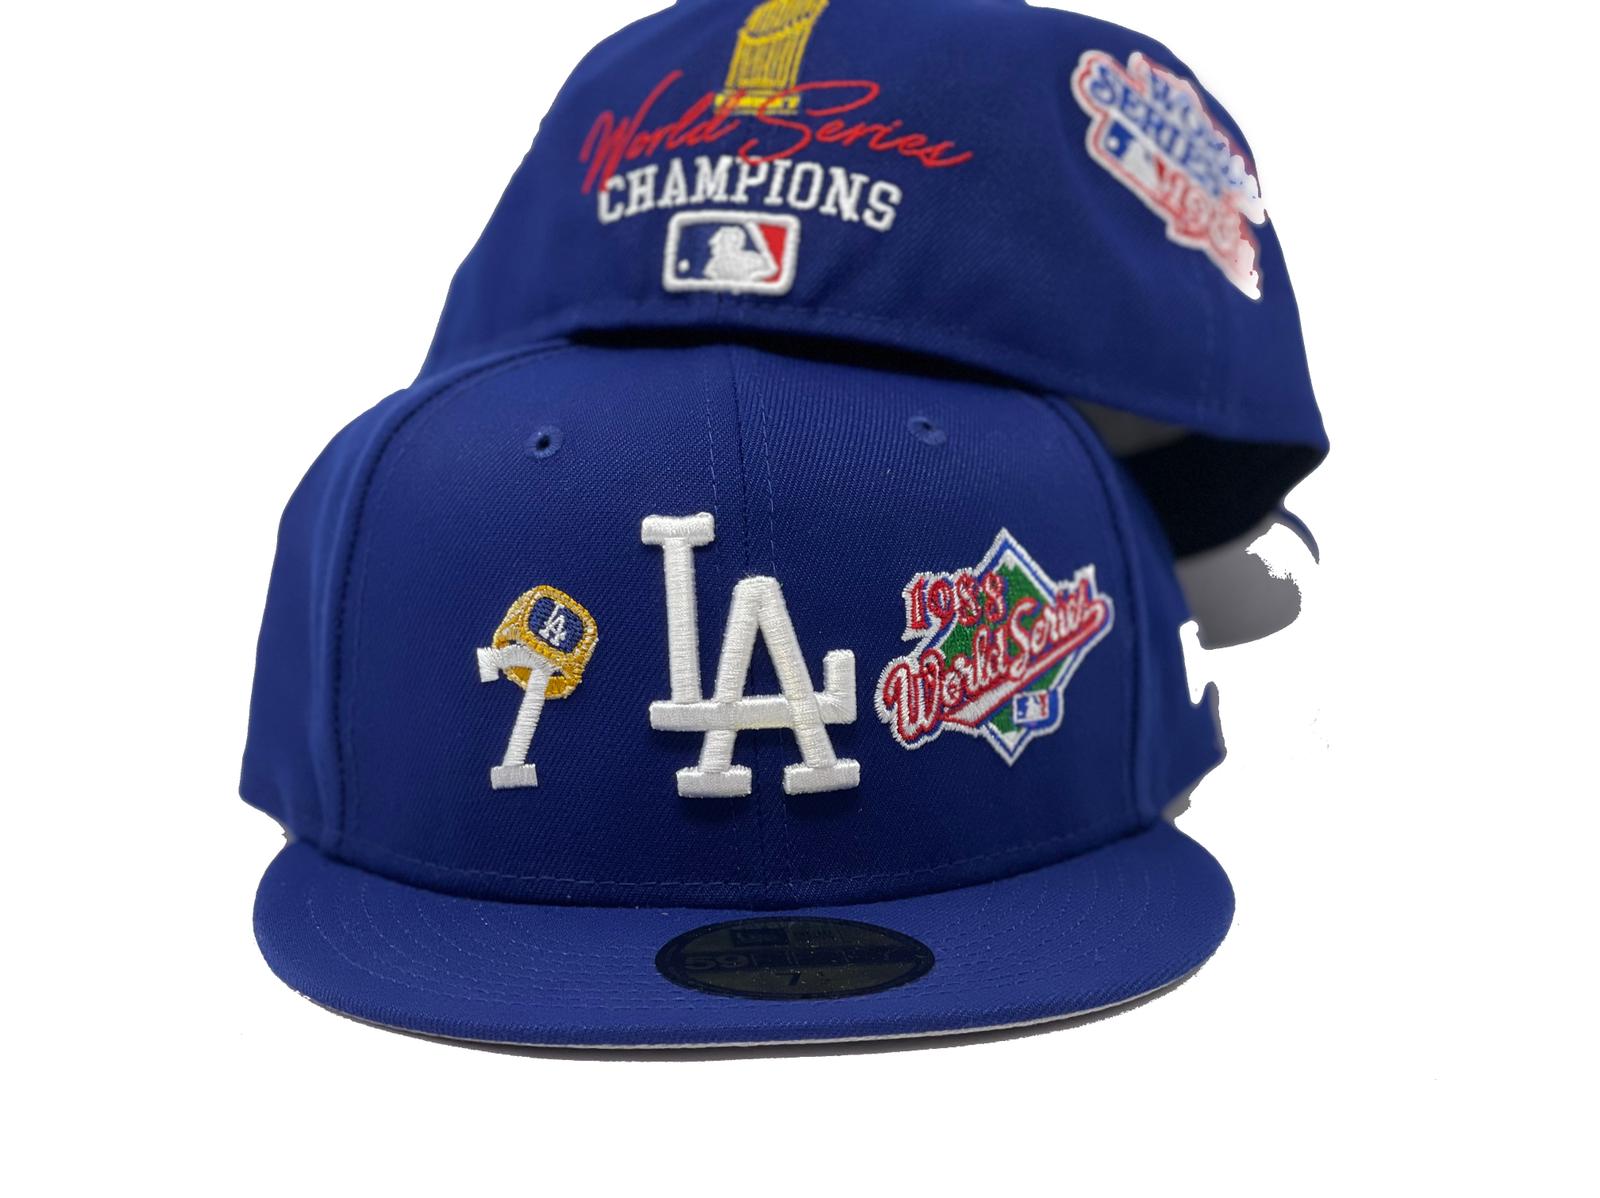 New Era, Other, Royal Blue La Dodgers Fitted Hat 7 2